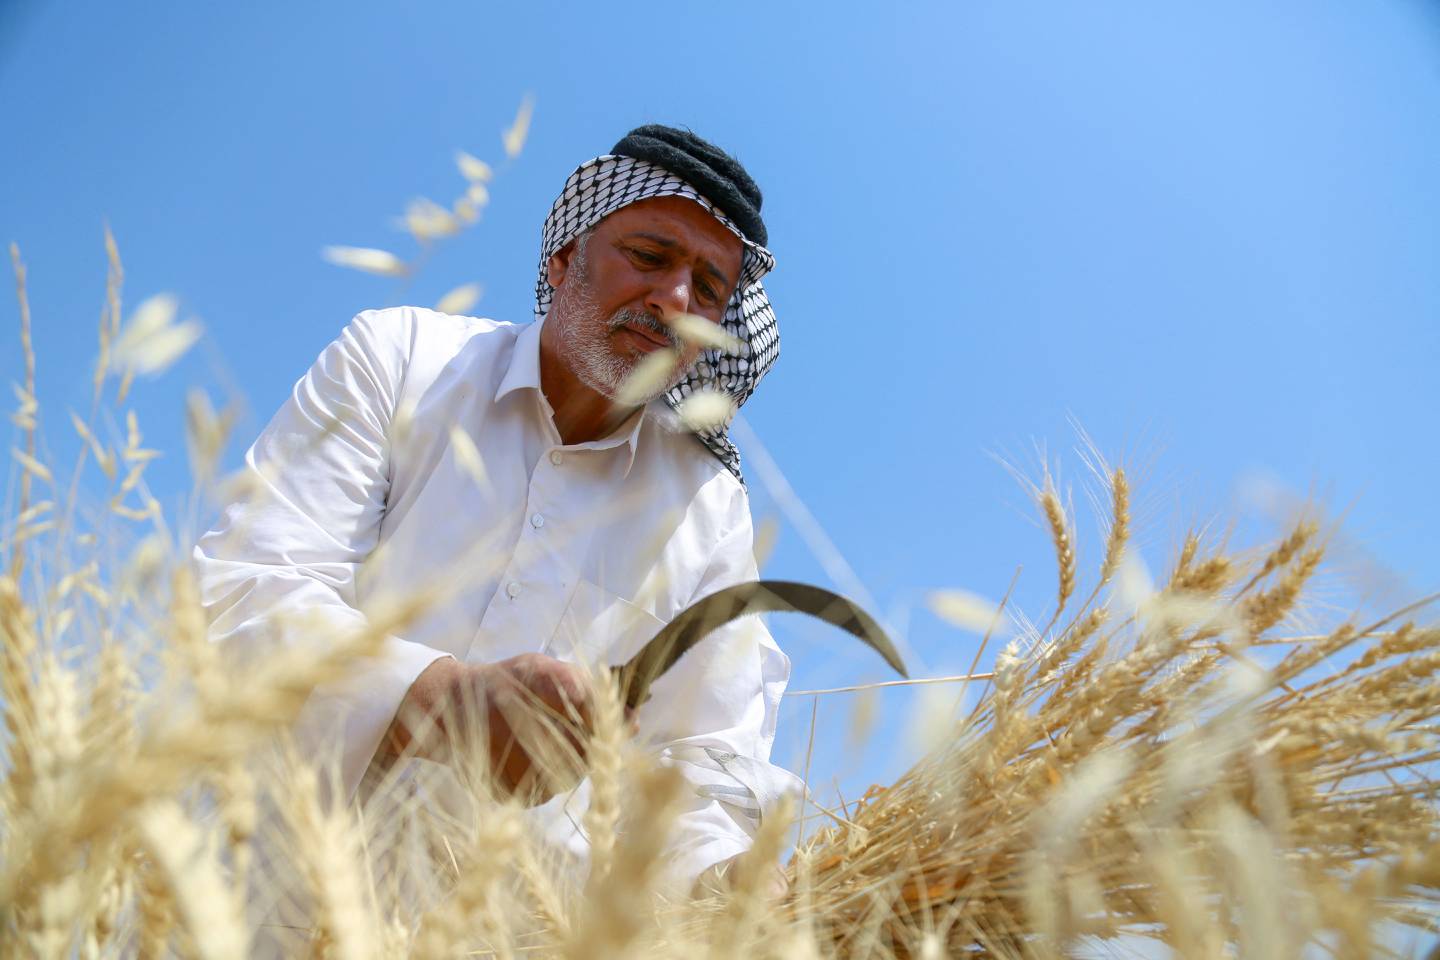 An Iraqi farmer works on harvesting wheat at his farm in Jaliha village in the central Diwaniya province. AFP